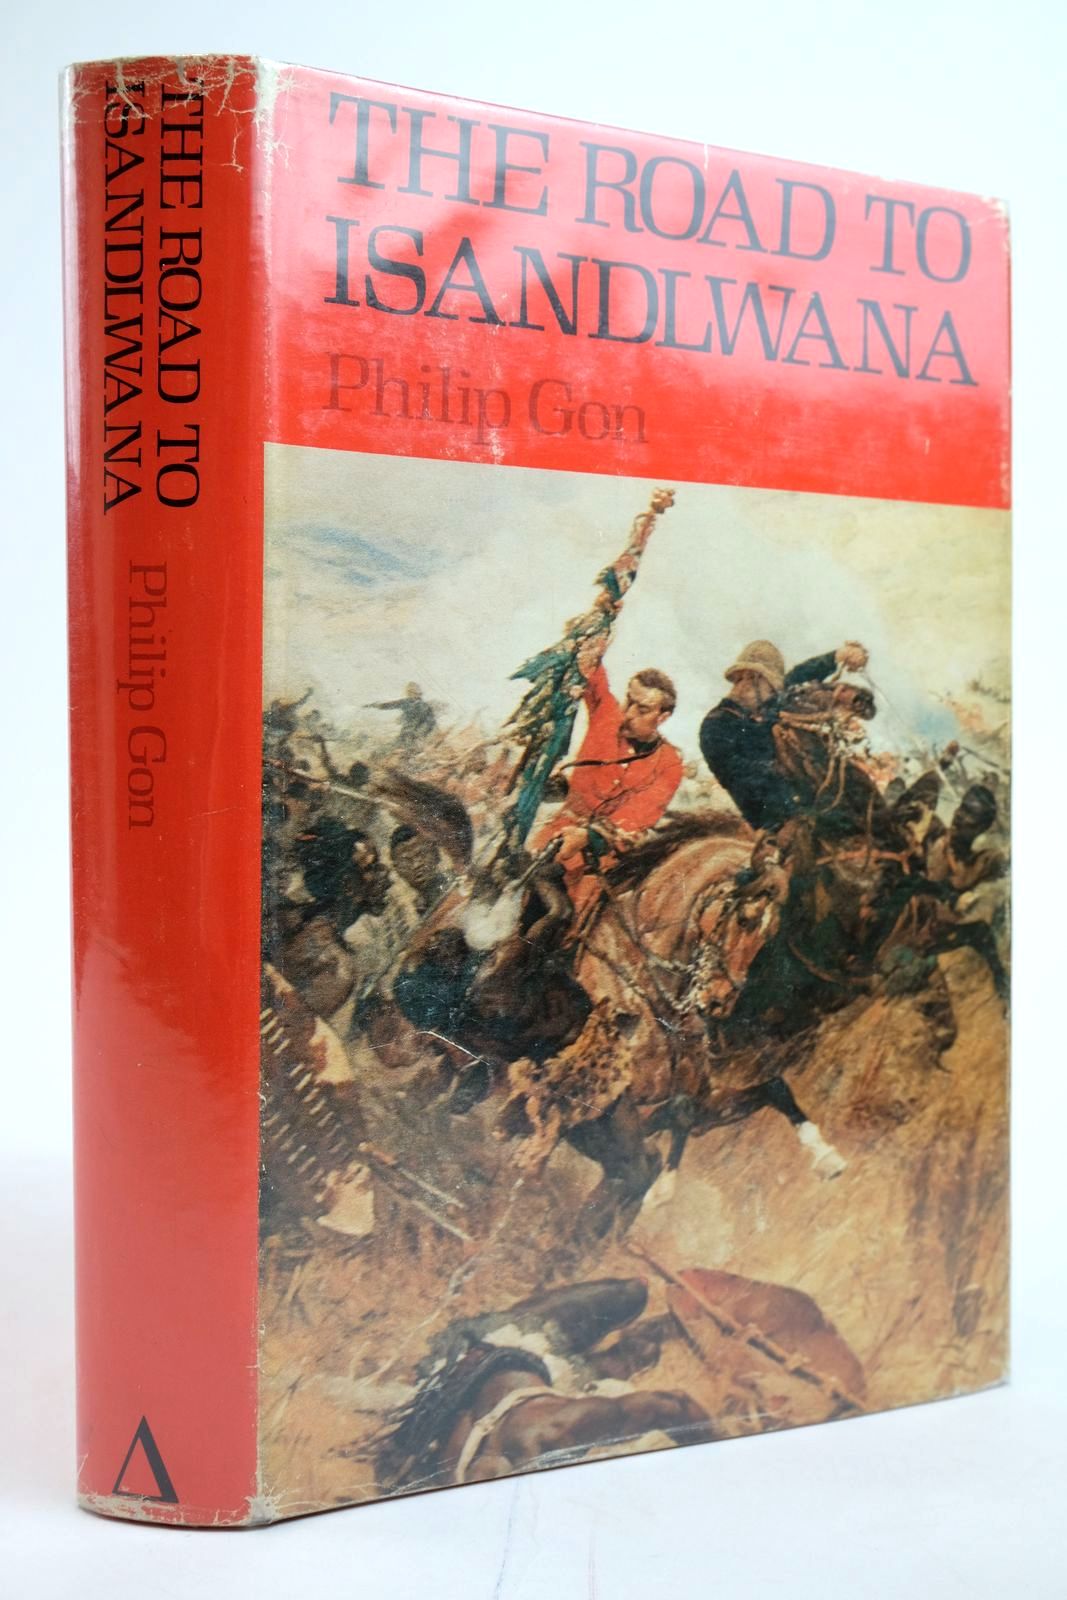 Photo of THE ROAD TO ISANDLWANA written by Gon, Philip published by Ad. Donker (STOCK CODE: 2135265)  for sale by Stella & Rose's Books